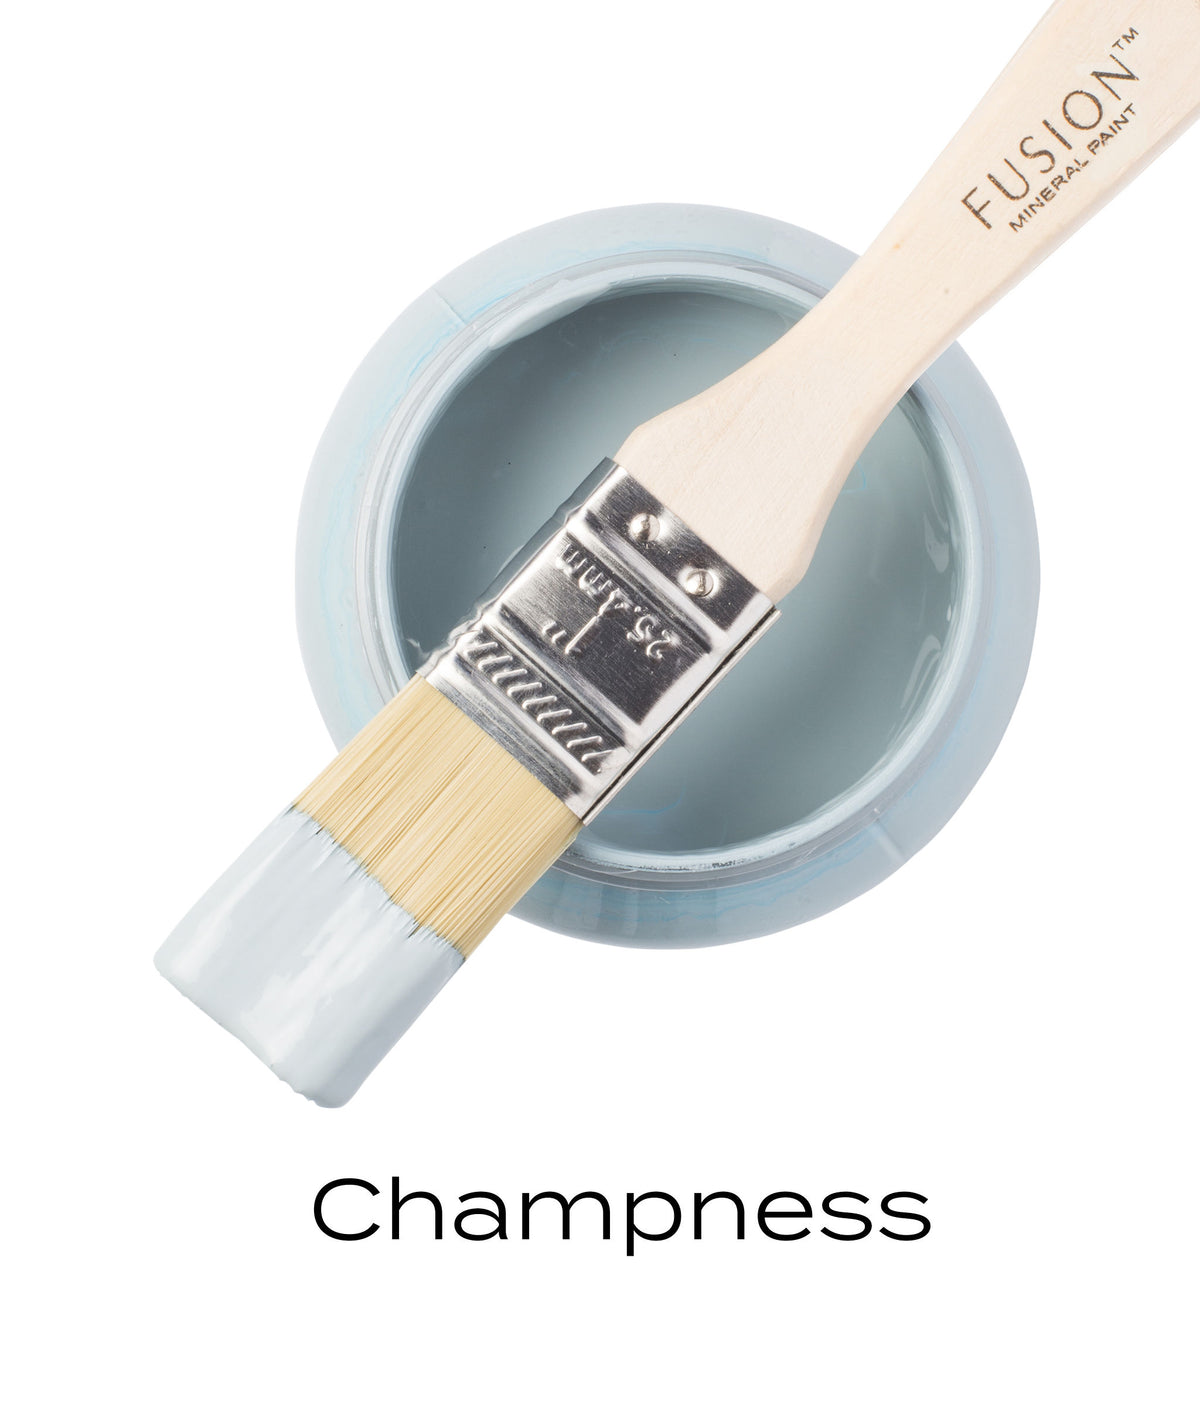 Champness-Fusion Mineral Paint